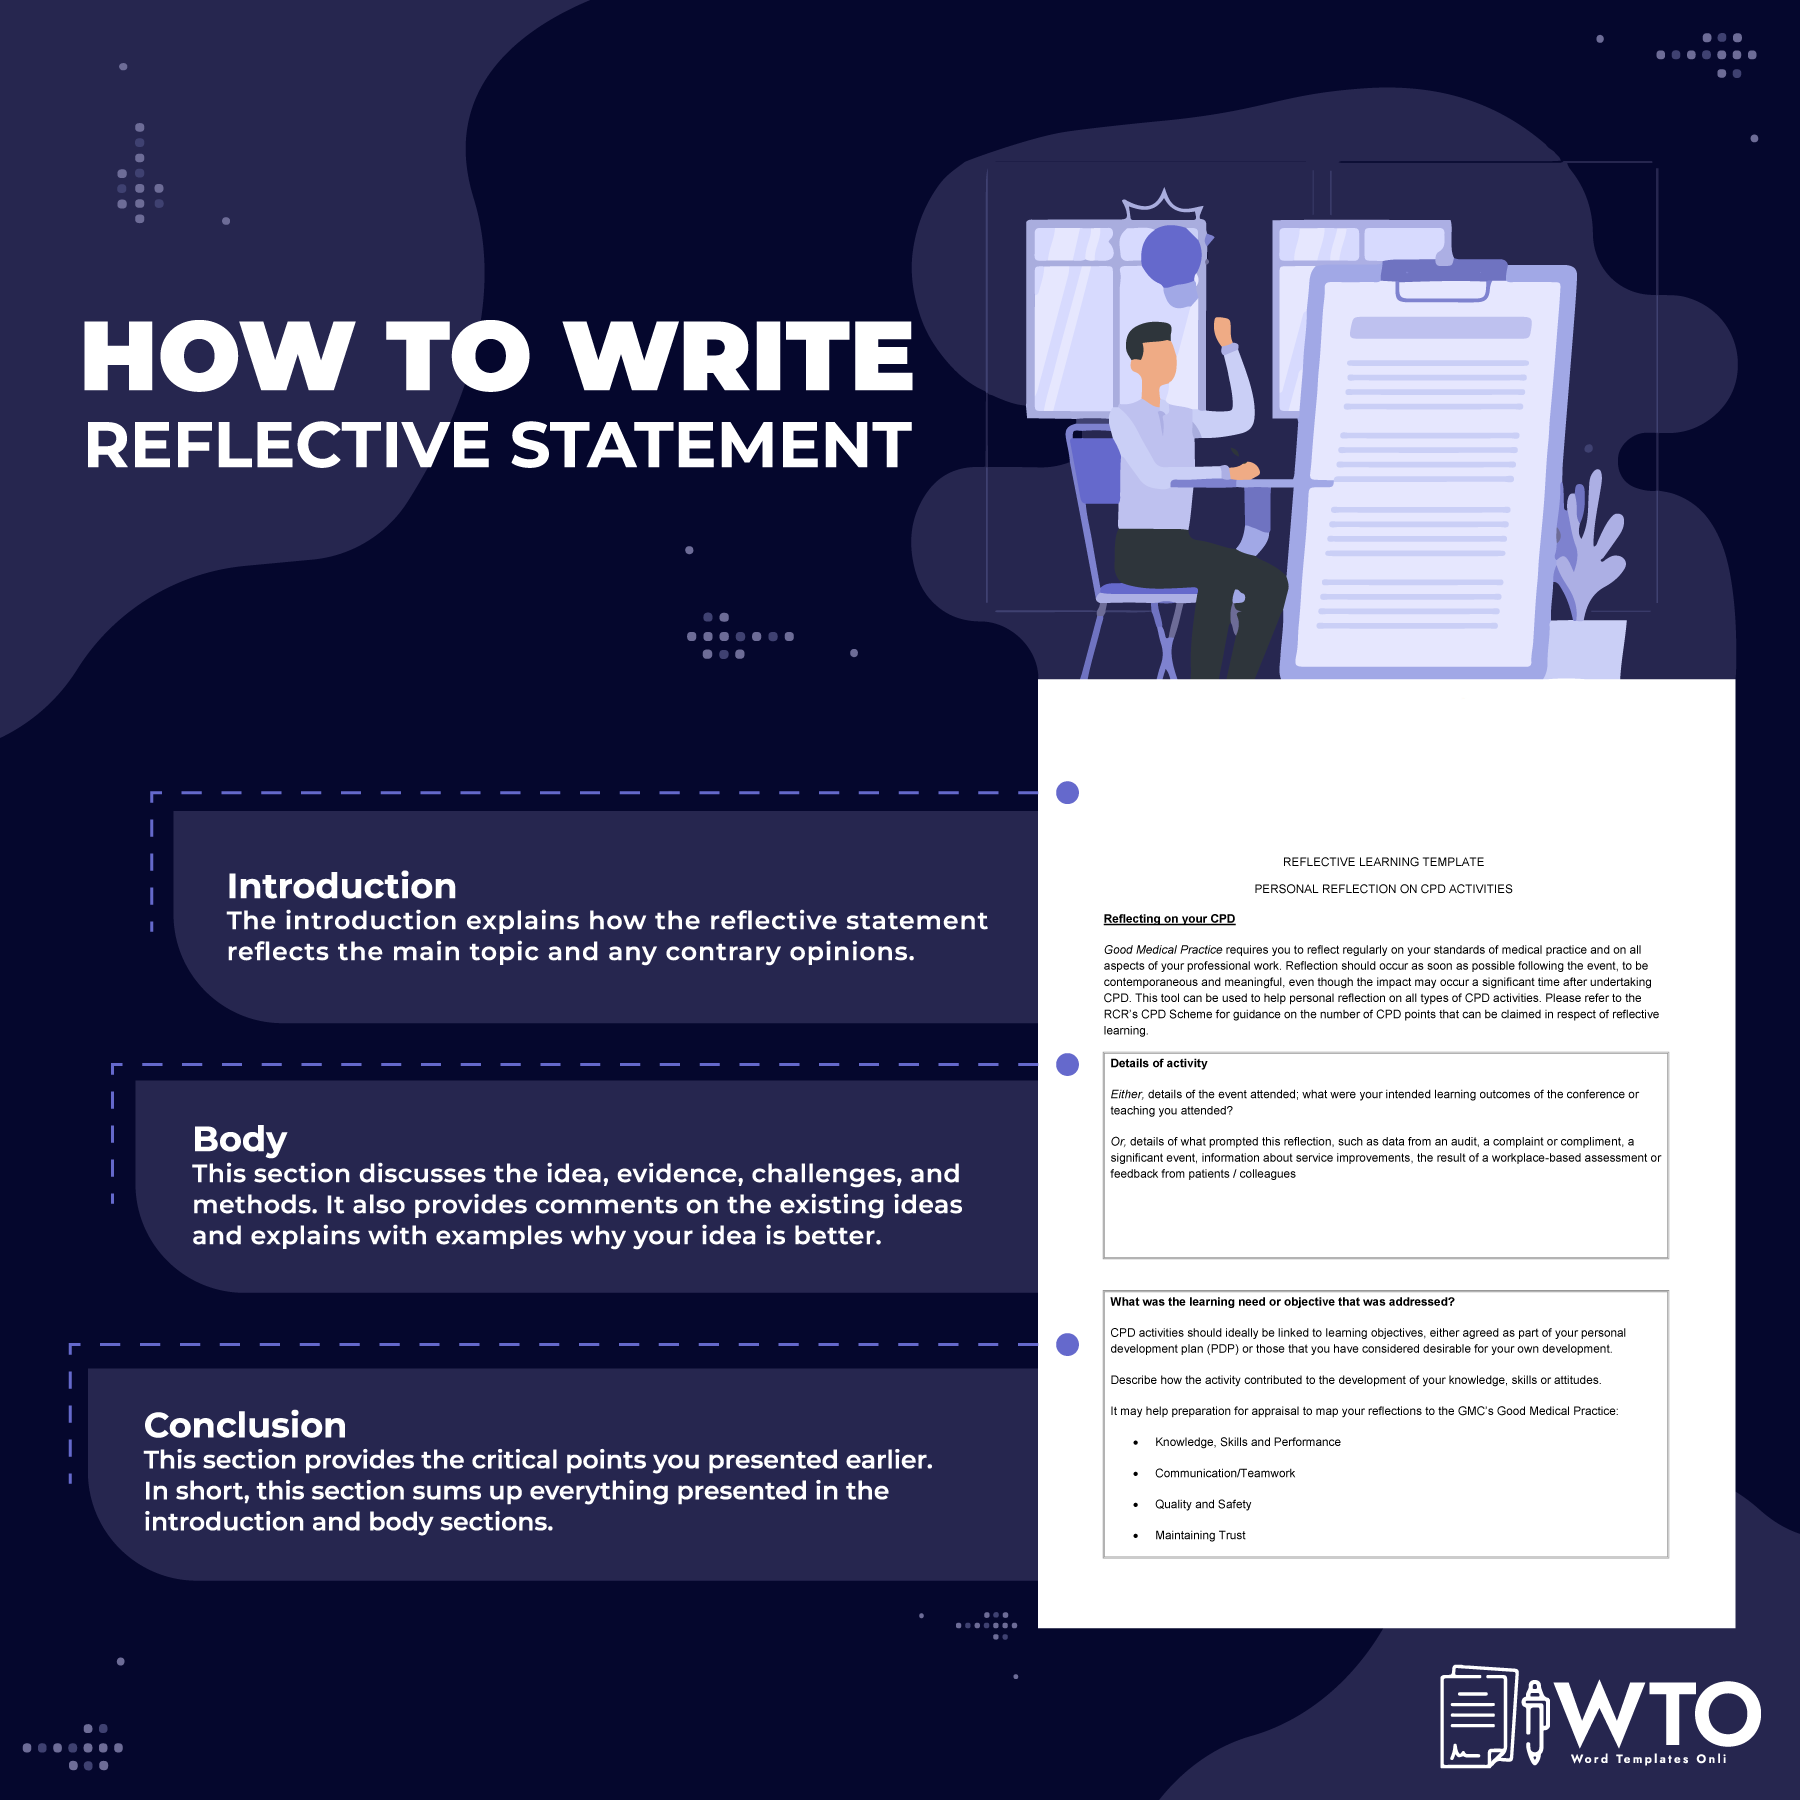 This infographic is about writing a reflective statement.